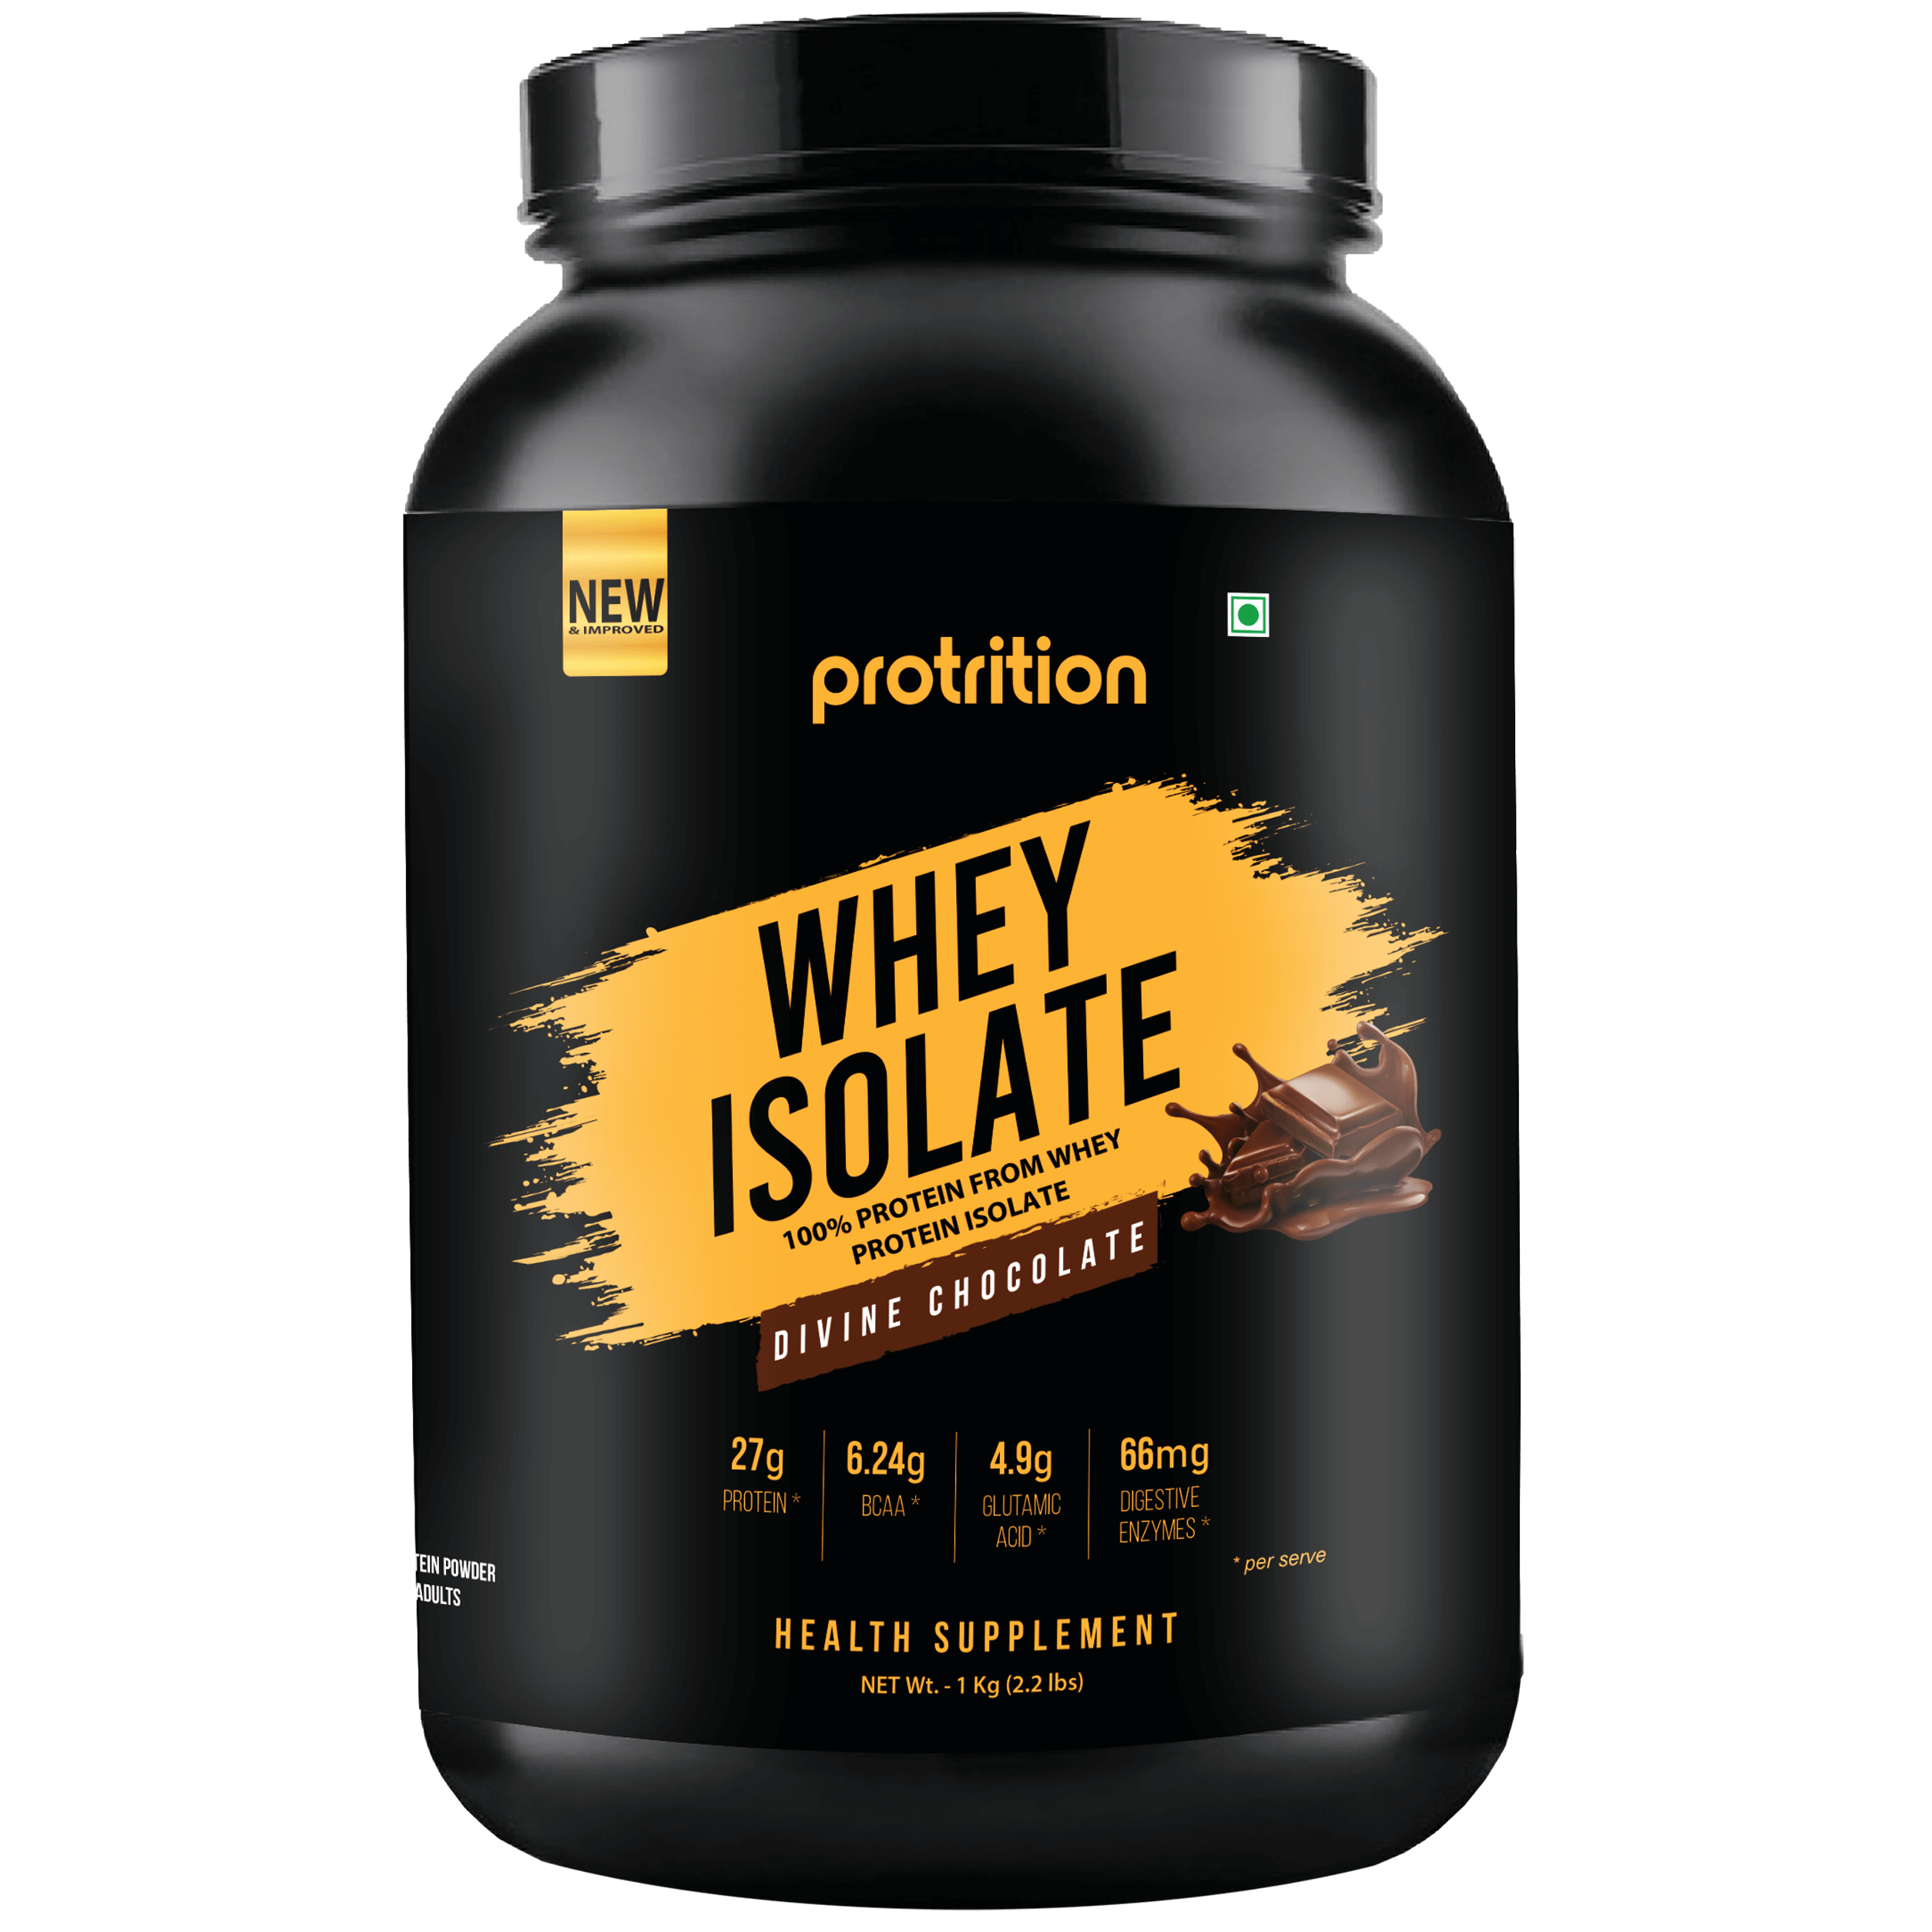 Protrition Whey Isolate, 1Kg, Divine Chocolate